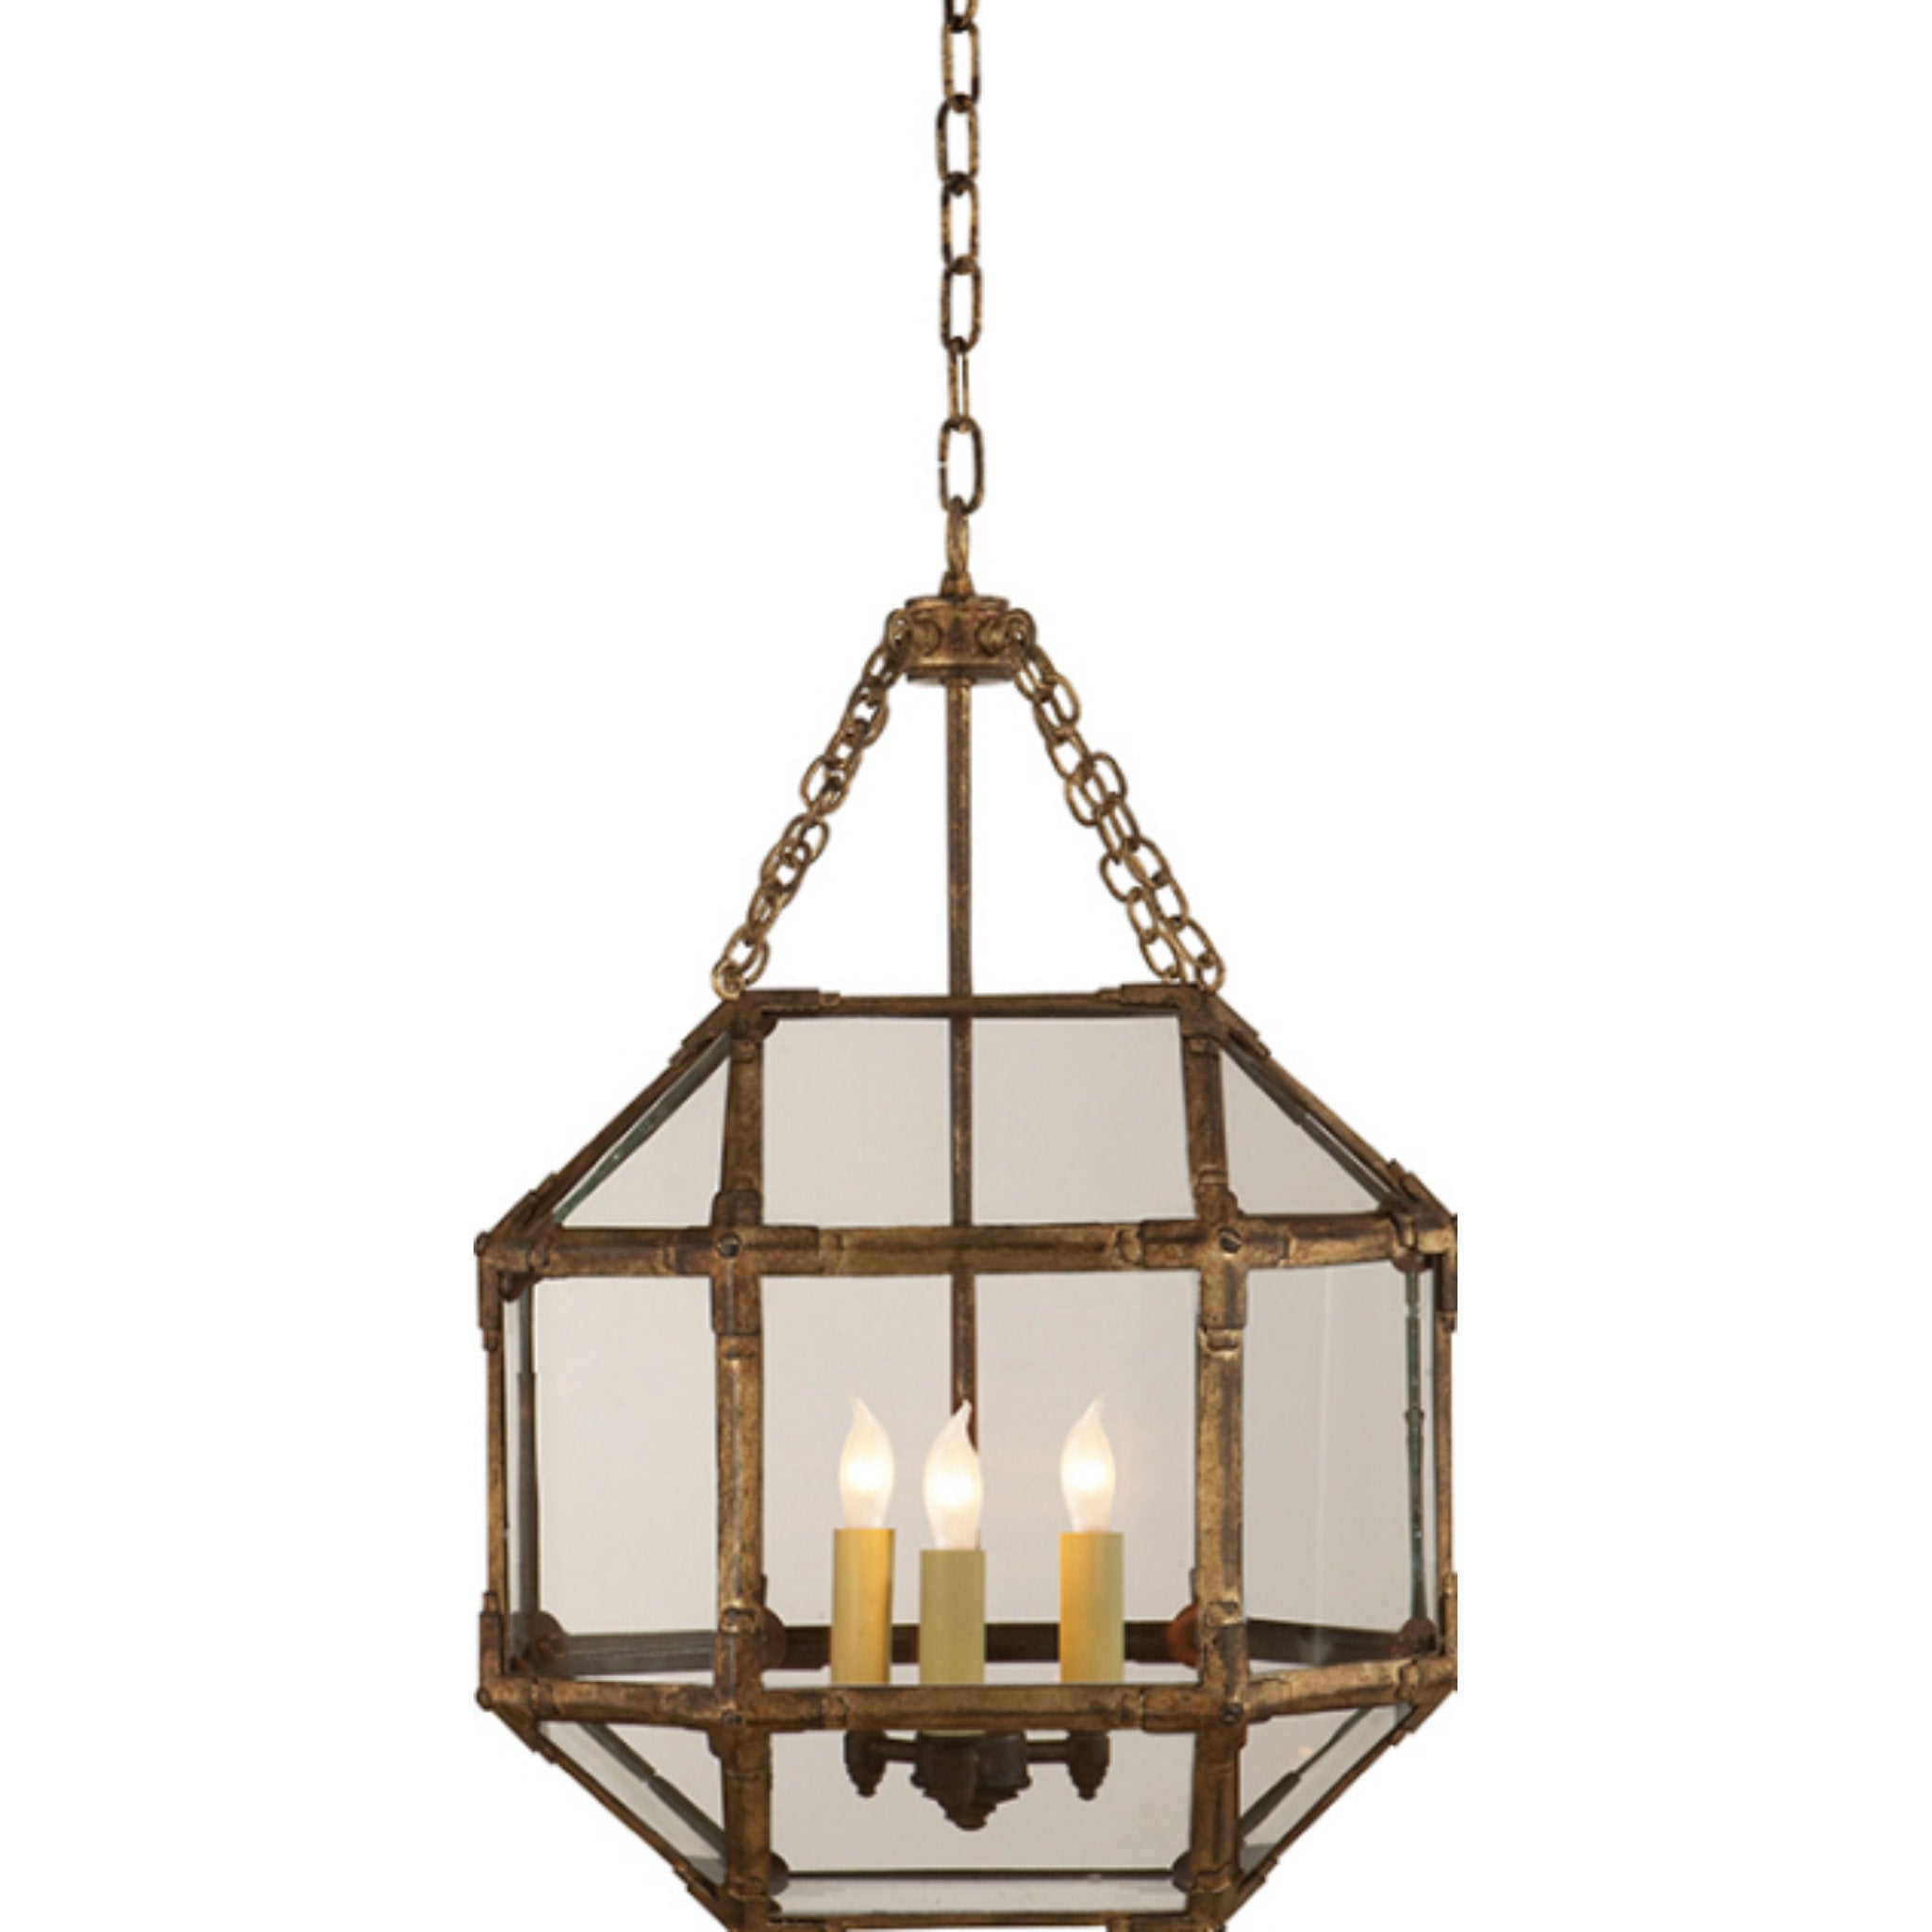 Suzanne Kasler Morris Small Lantern in Gilded Iron with Clear Glass